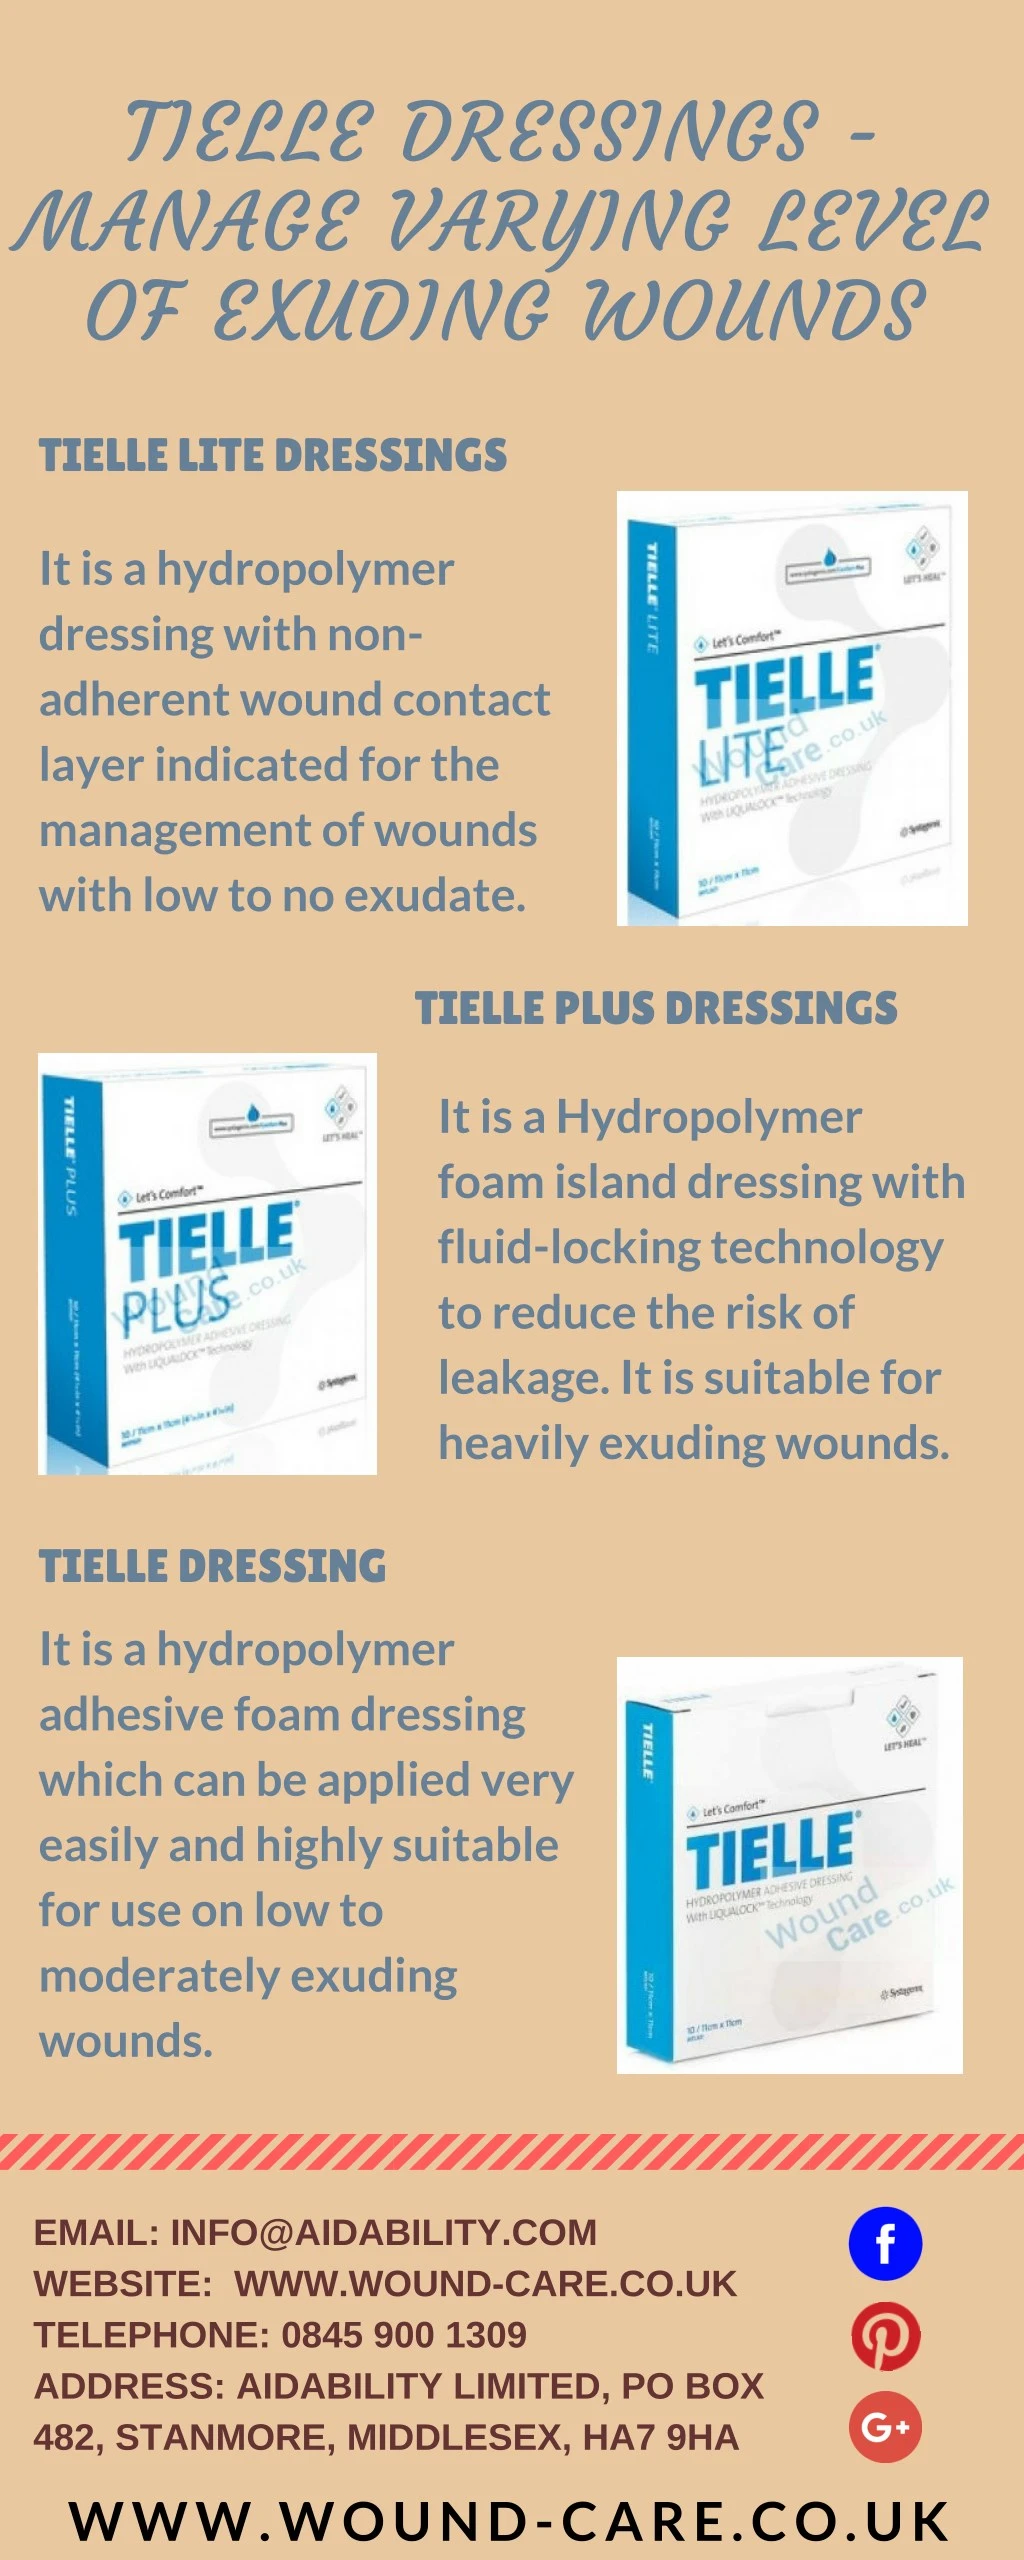 tielle dressings manage varying level of exuding